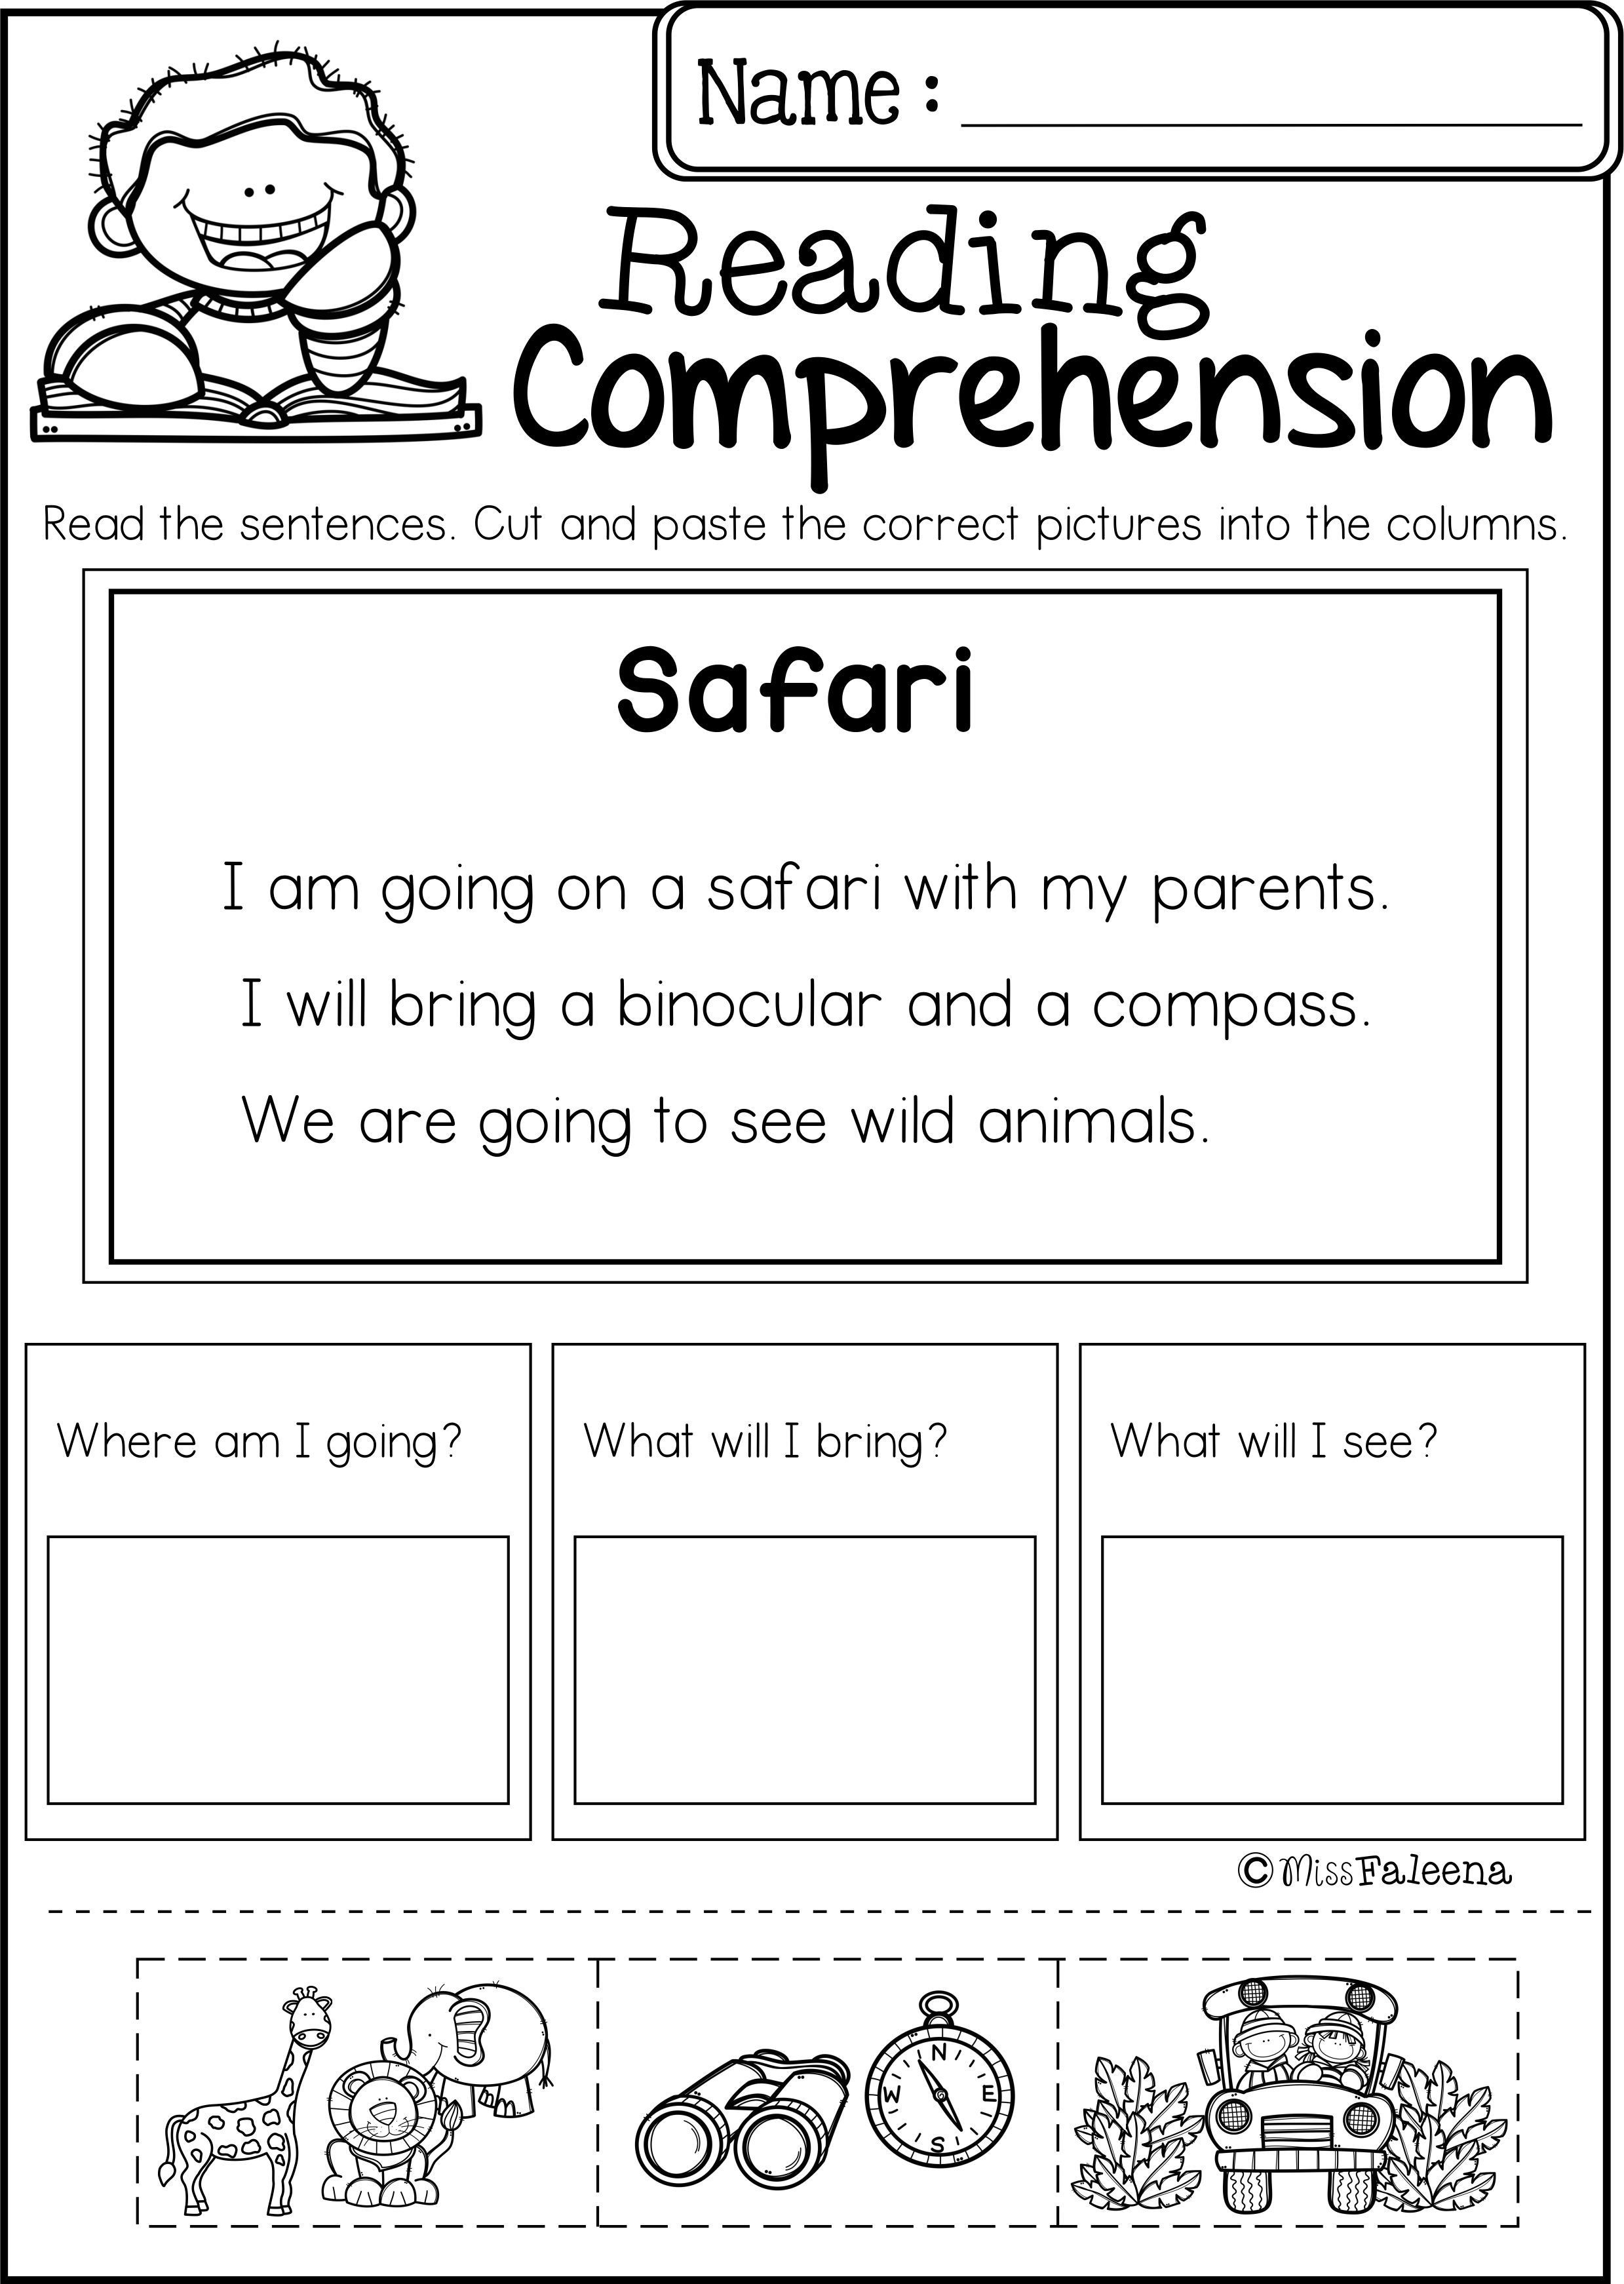 Preschool Reading Comprehension Worksheets Pin On Special Education